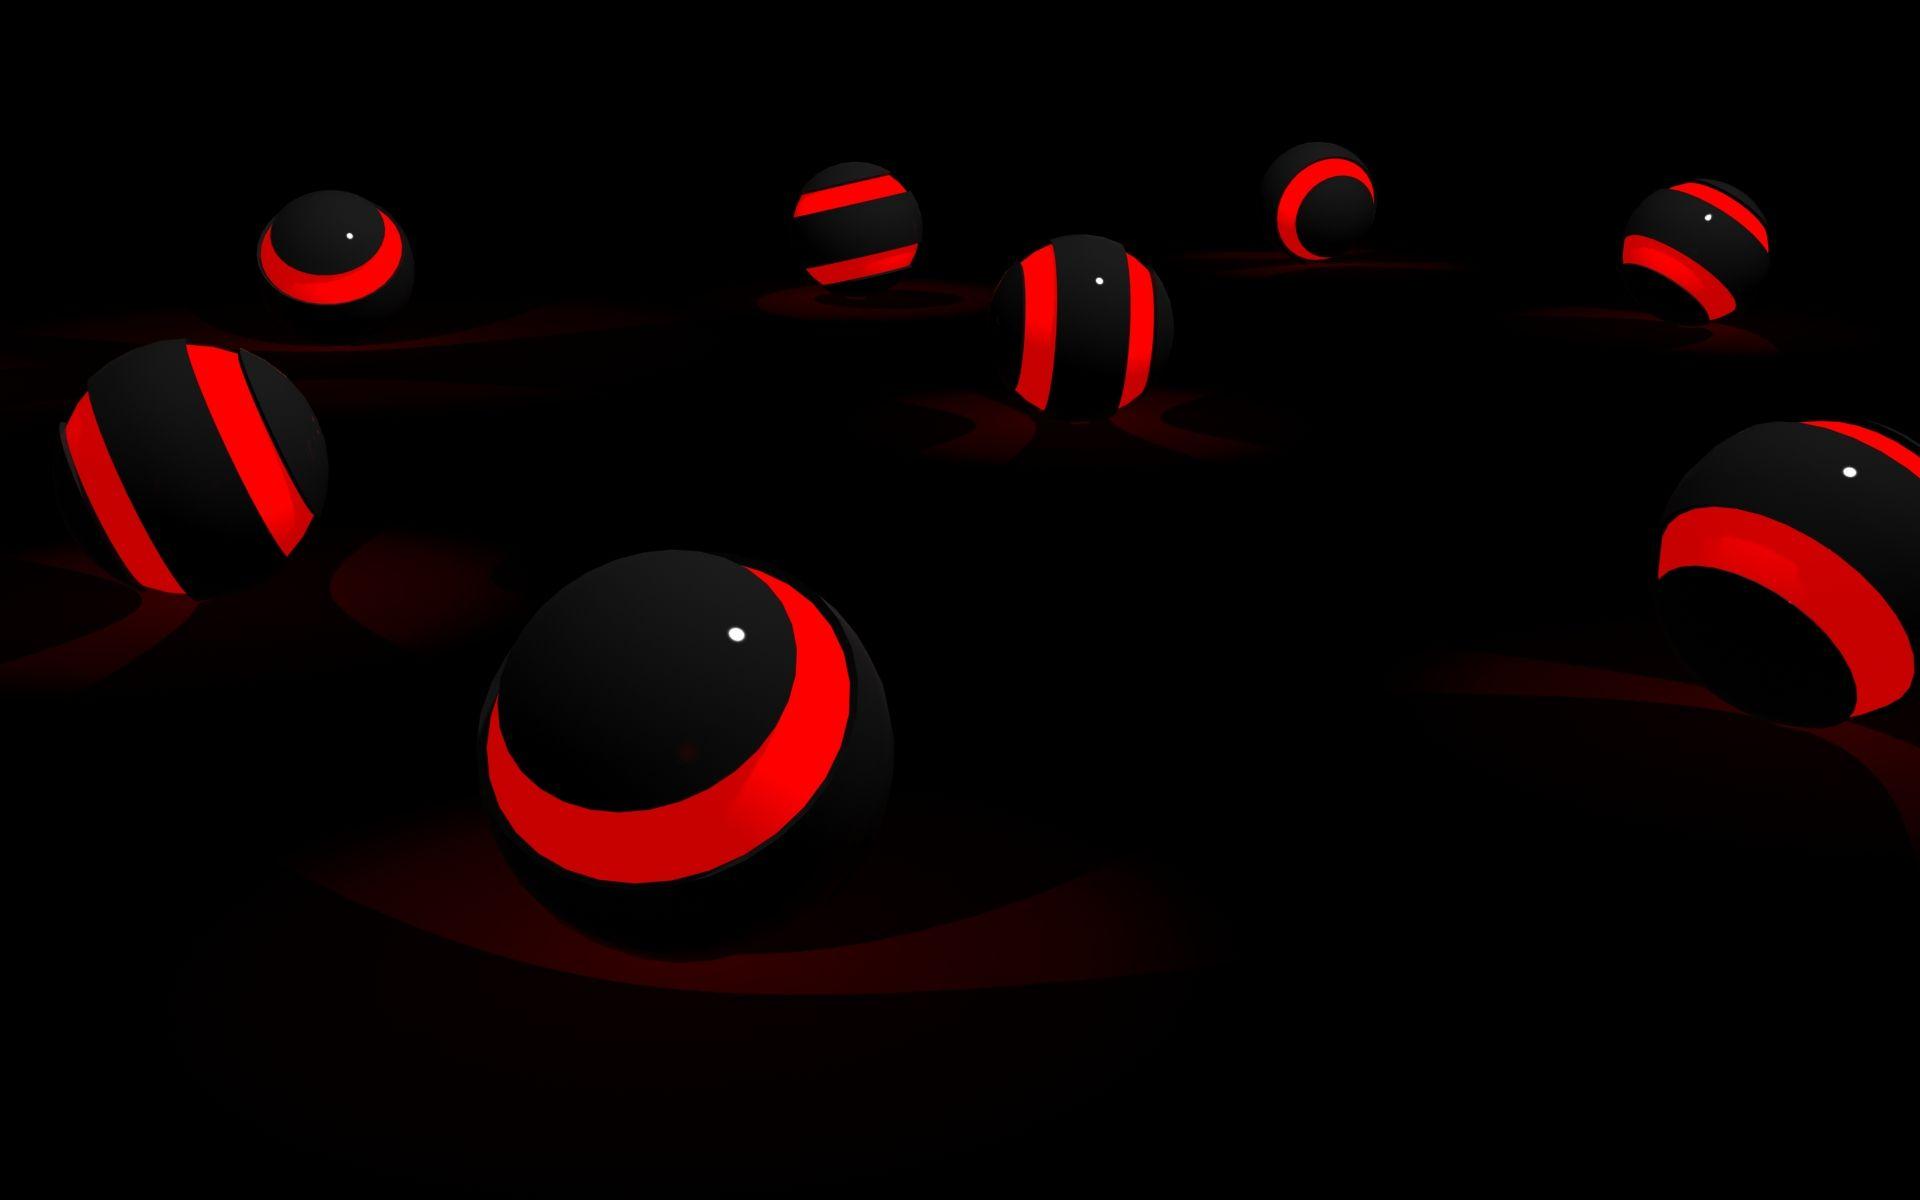 Wallpaper For > Black And Red Abstract Background